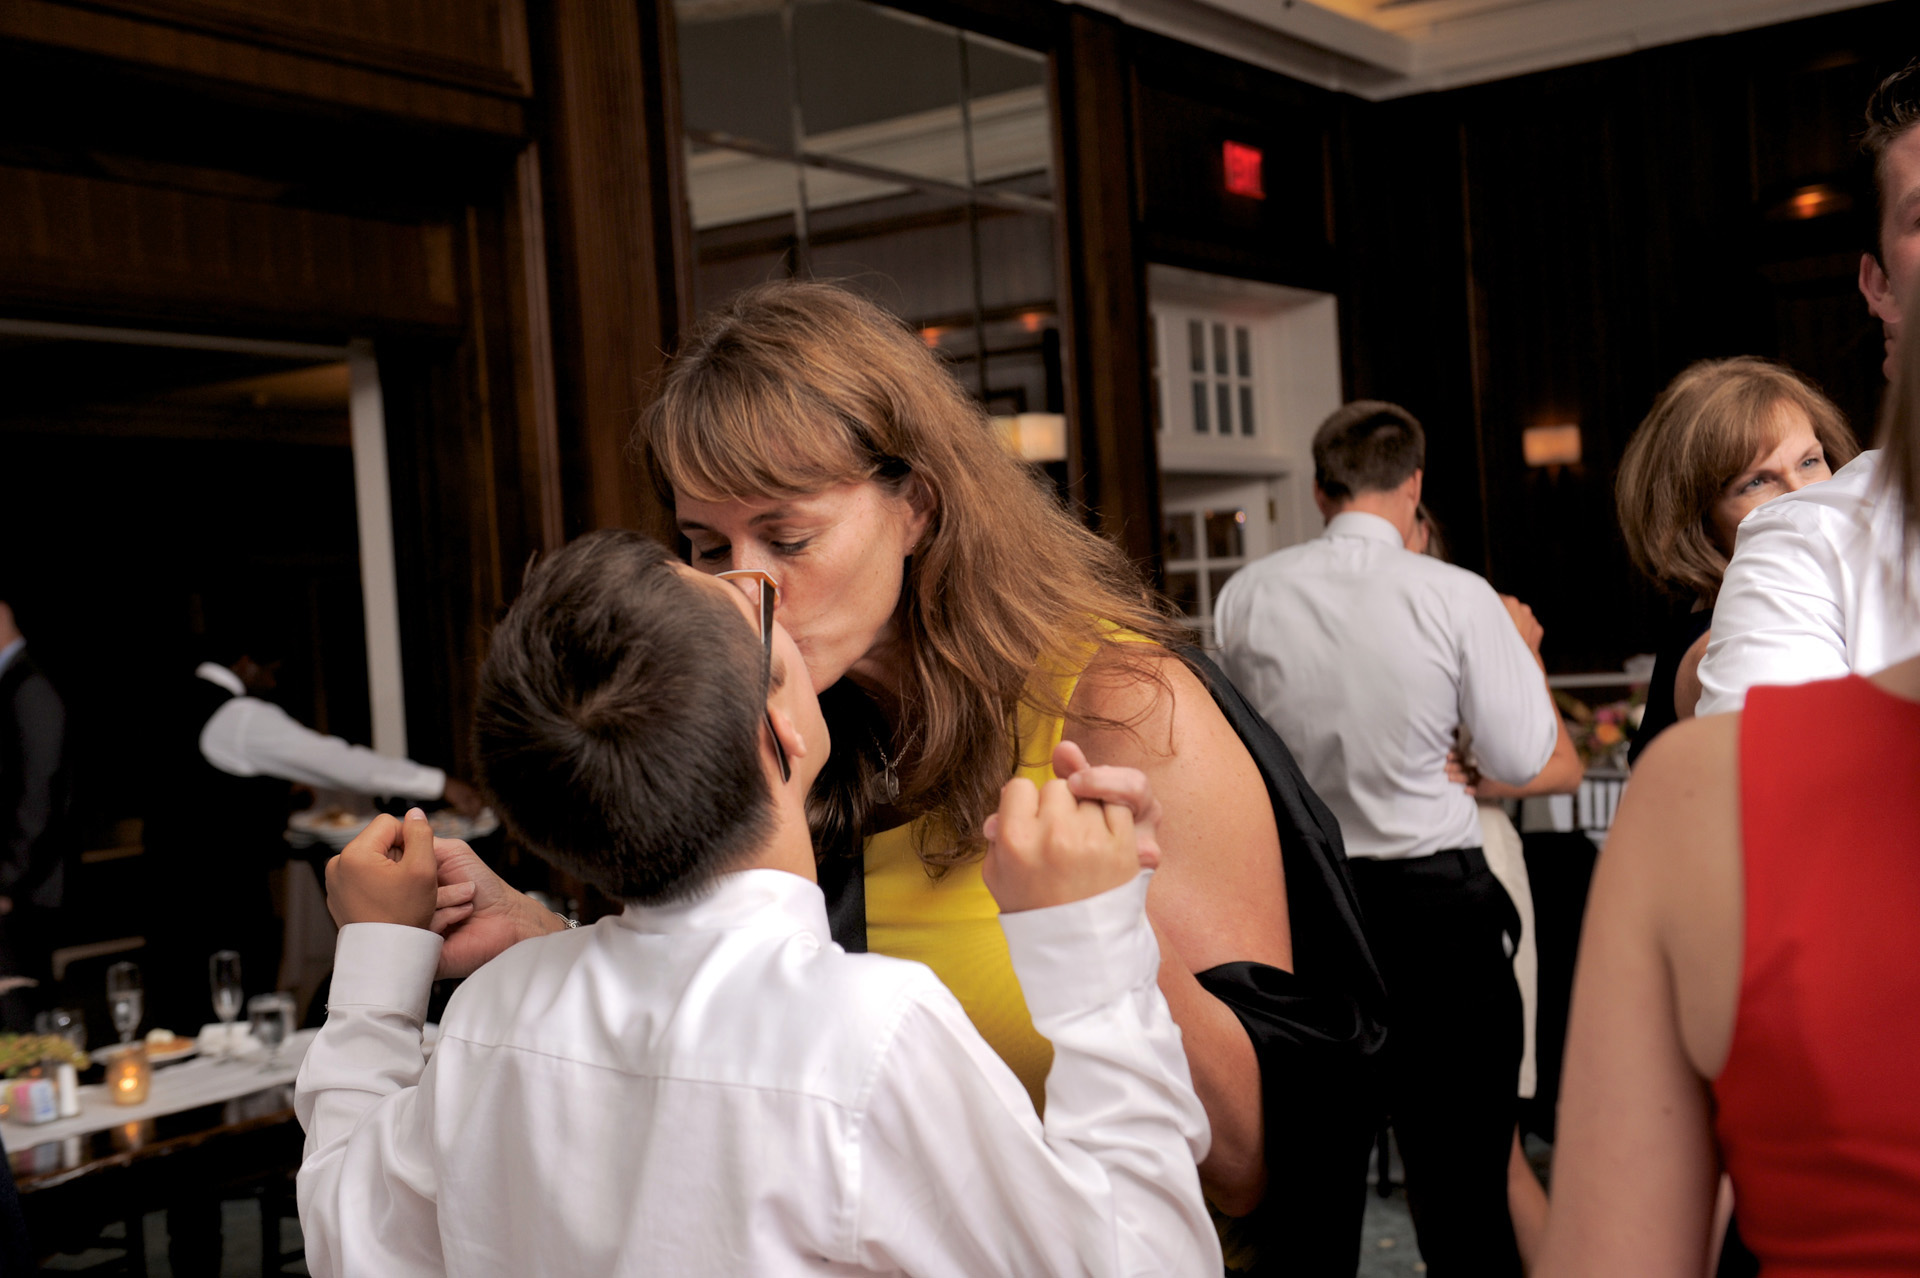 Detroit Golf Club wedding photographer's photo of ring bearer getting a kiss from his mother at the Detroit Golf Club.